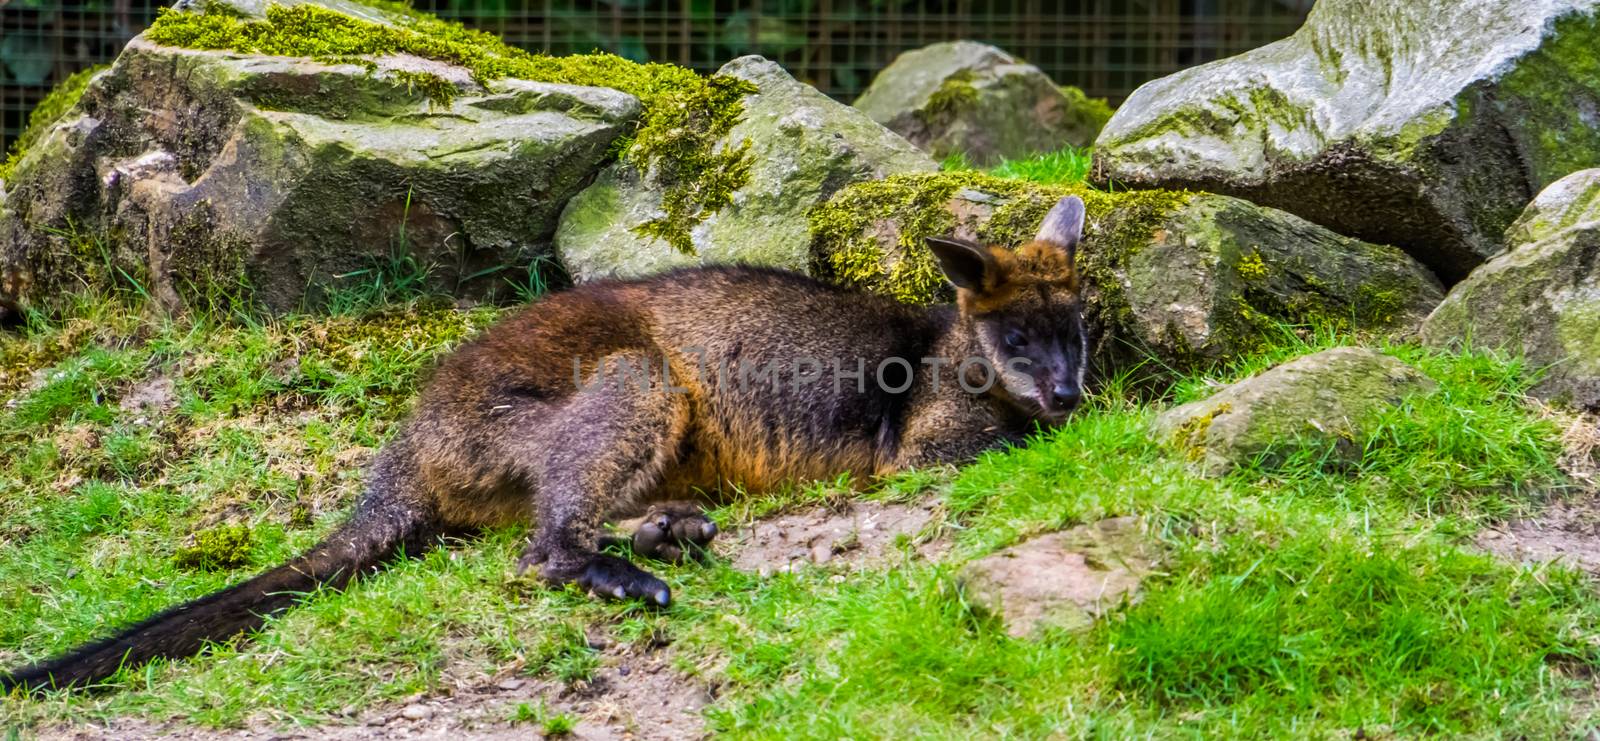 closeup of a swamp wallaby laying on the ground, tropical marsupial from Australia